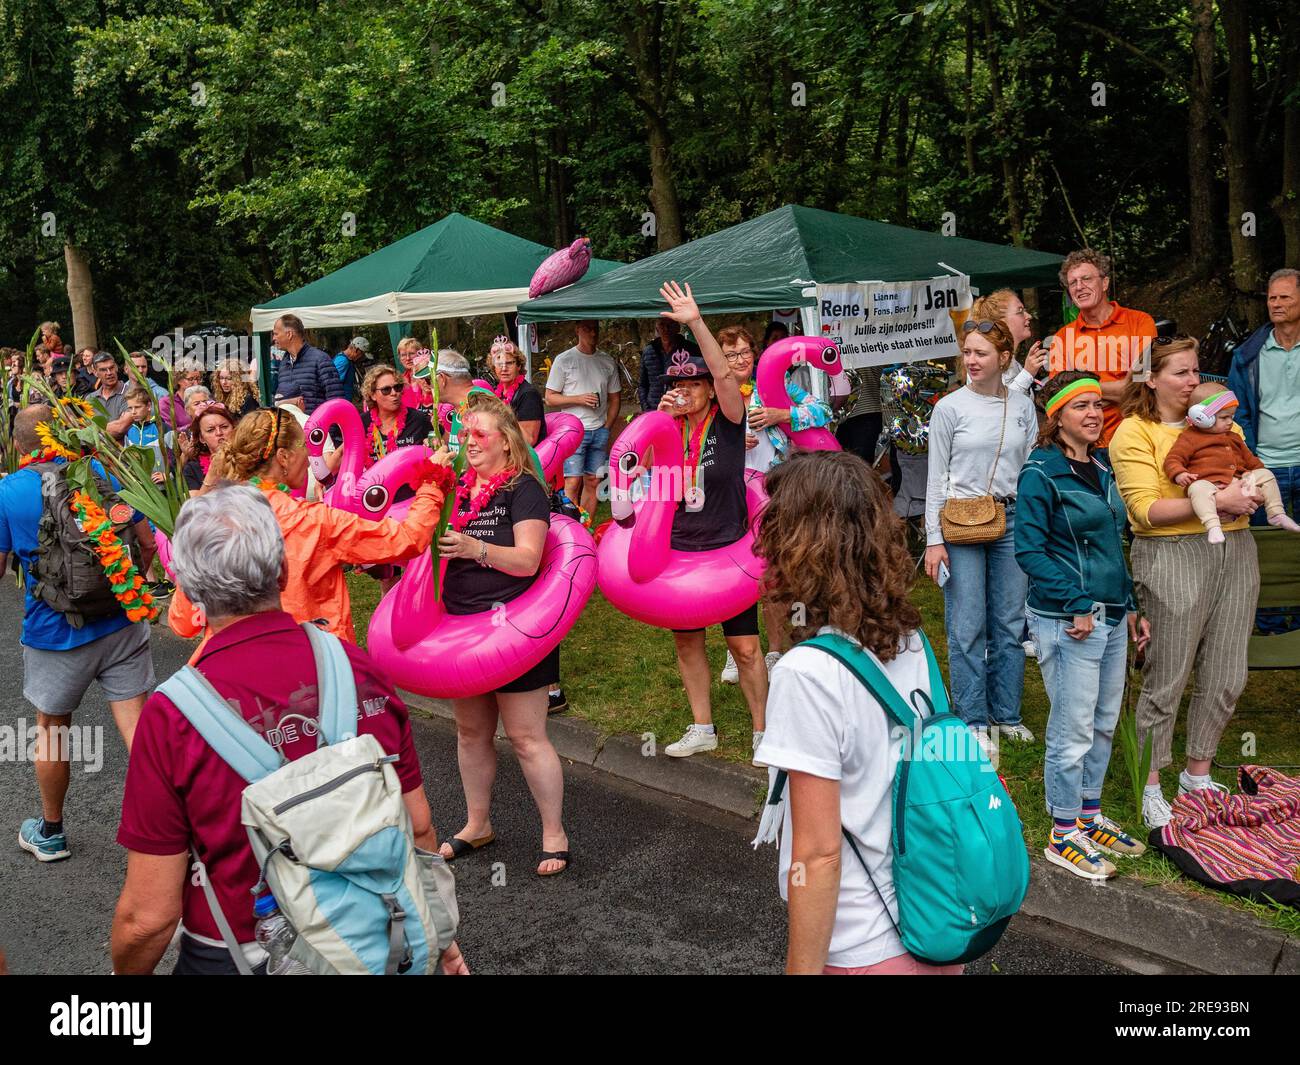 July 21, 2023, Nijmegen, Netherlands: People wearing pink flamingos are seen cheering the walkers. Since it is the worldâ€™s biggest multi-day walking event, The International Four Days Marches (in Dutch 'De Vierdaagse') is seen as the prime example of sportsmanship and international bonding between military servicemen, women and civilians from many different countries. This year, it was the 105 edition and the official amount of walkers registered was 43,363 from 77 countries. Participants can choose to walk 30km, 40km, or 50km per day. On the last day, 39,019 walkers crossed the finish line. Stock Photo